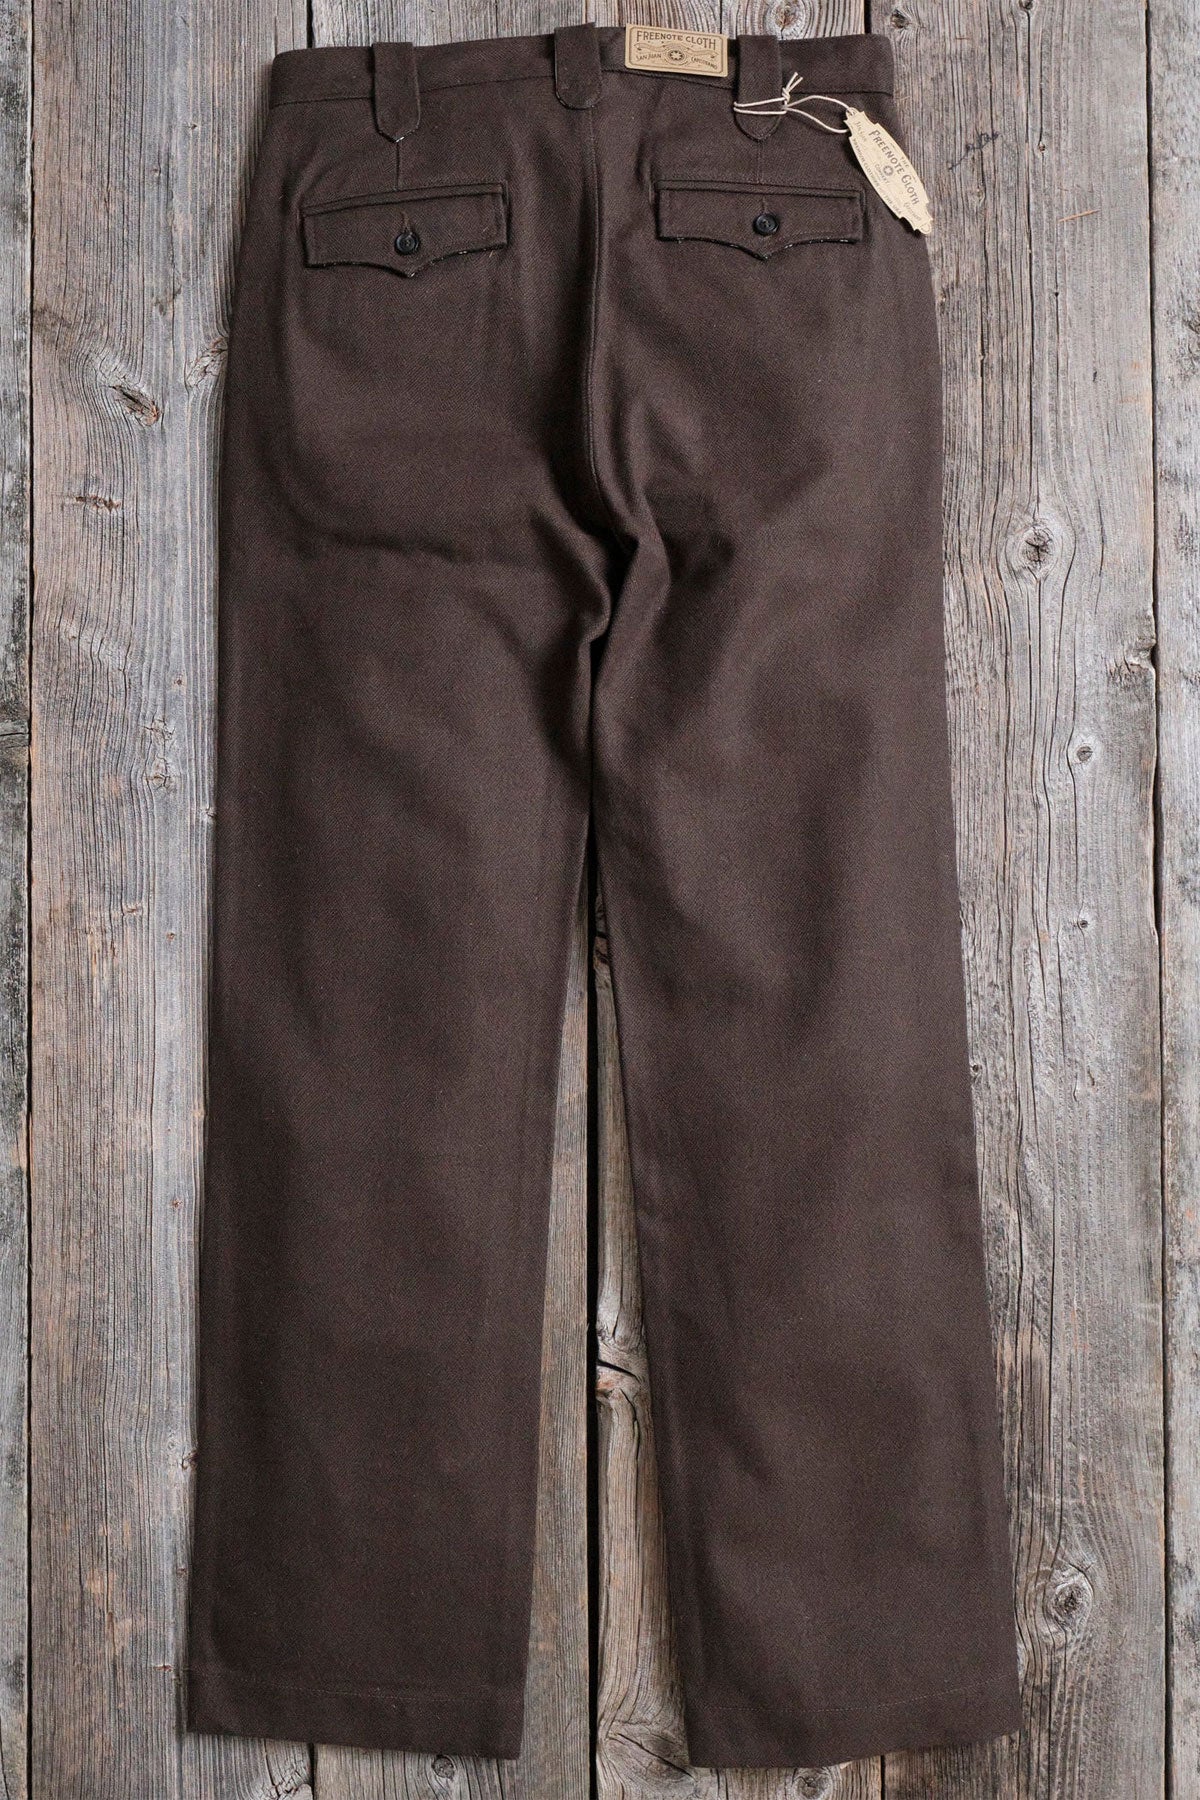 Freenote Cloth - Duster Pant Brown